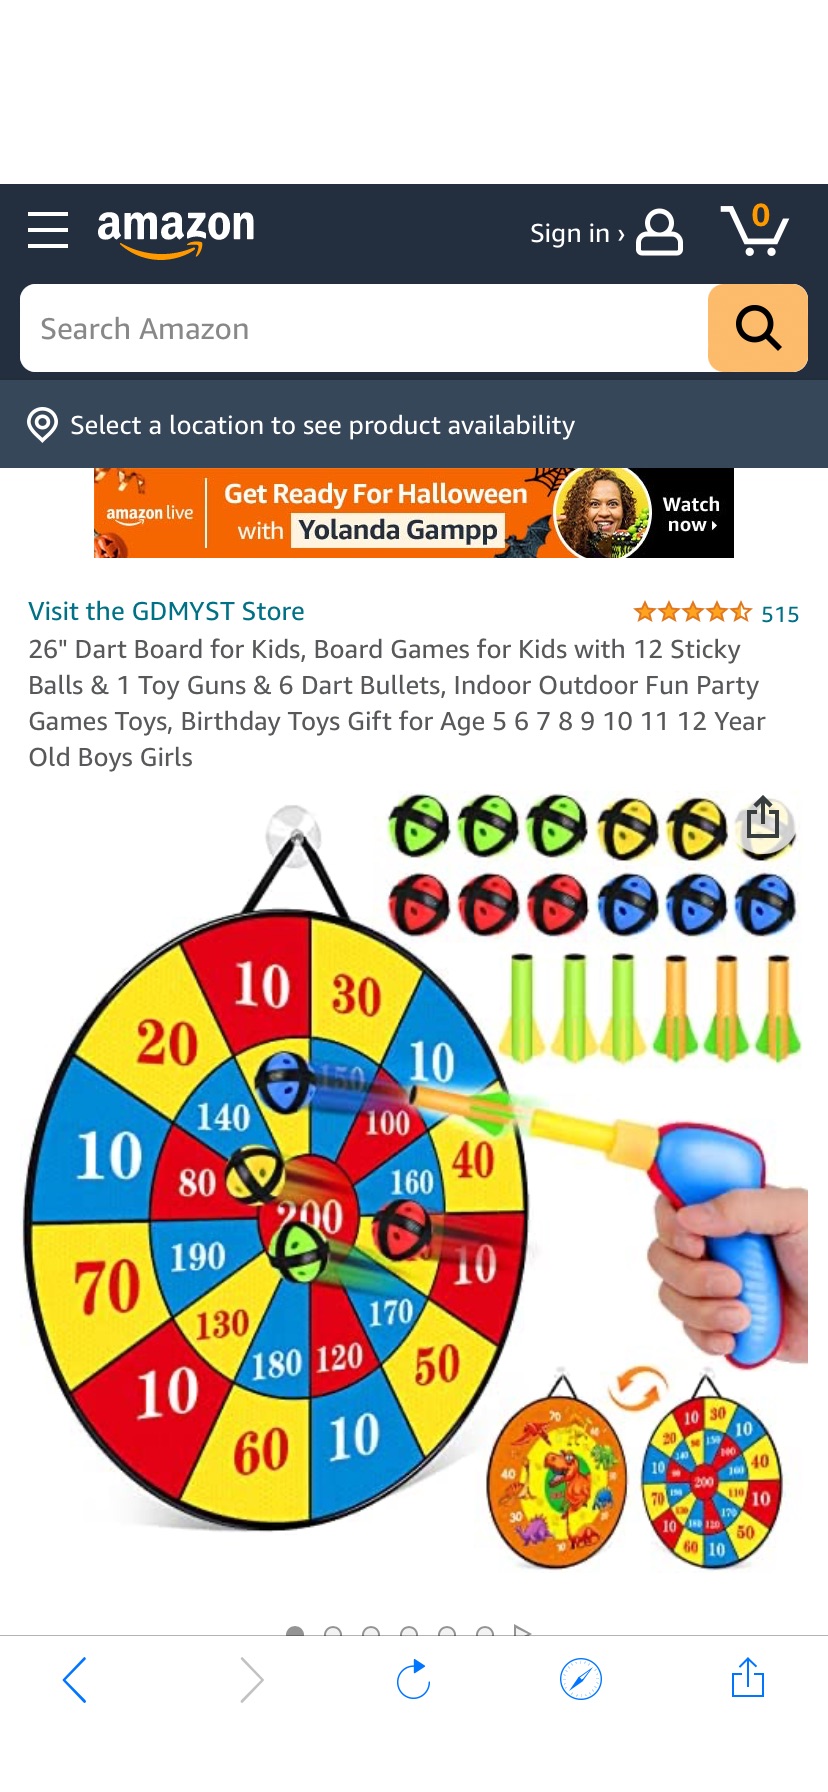 Amazon.com: 26" Dart Board for Kids, Board Games for Kids with 12 Sticky Balls & 1 Toy Guns & 6 Dart Bullets